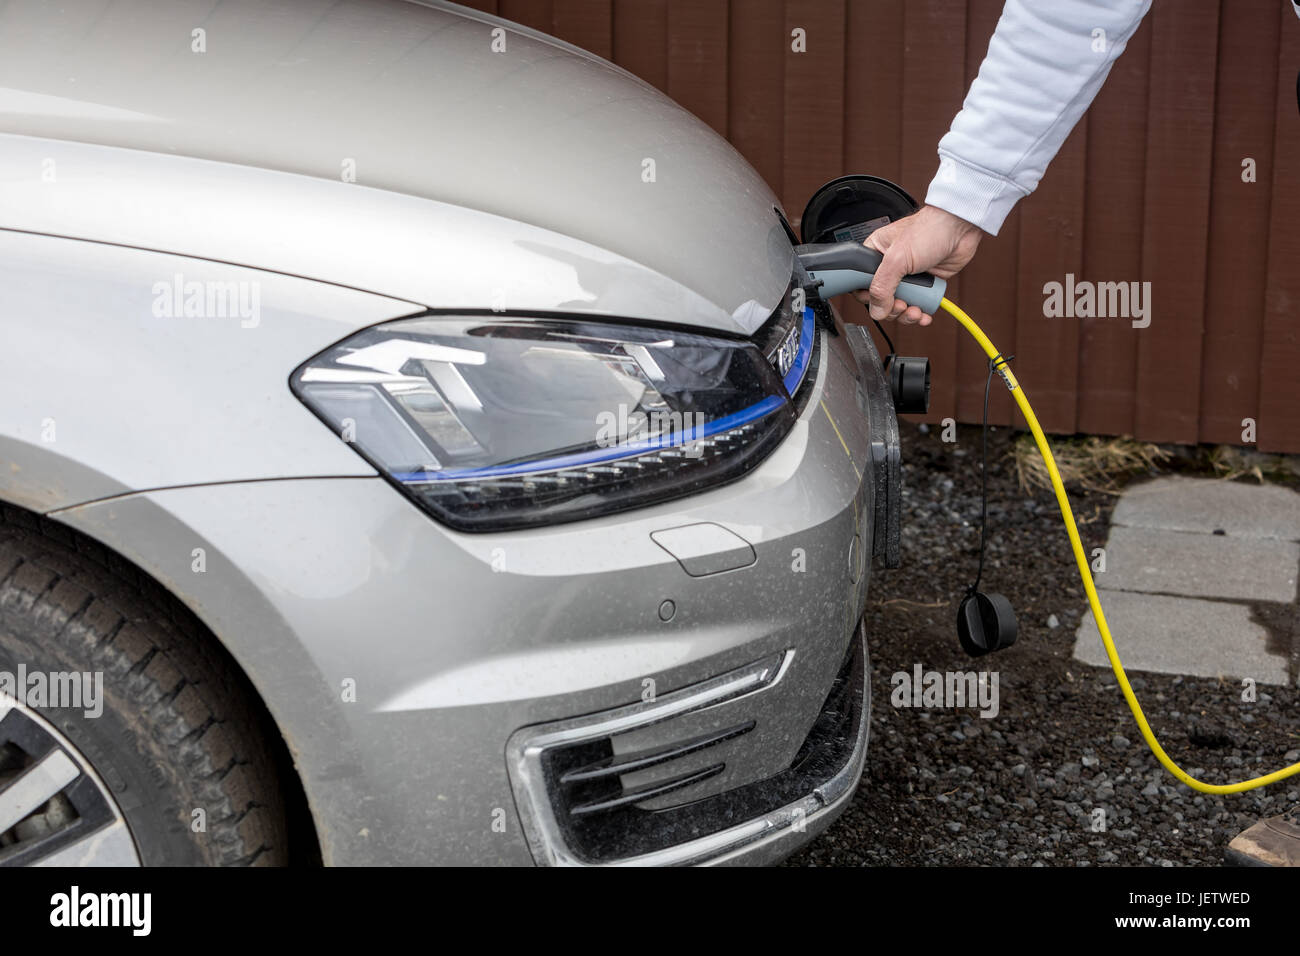 Vik, Iceland - Marsh 29, 2017: Charging An Electric Car With The Power Cable Supply Plugged In Stock Photo